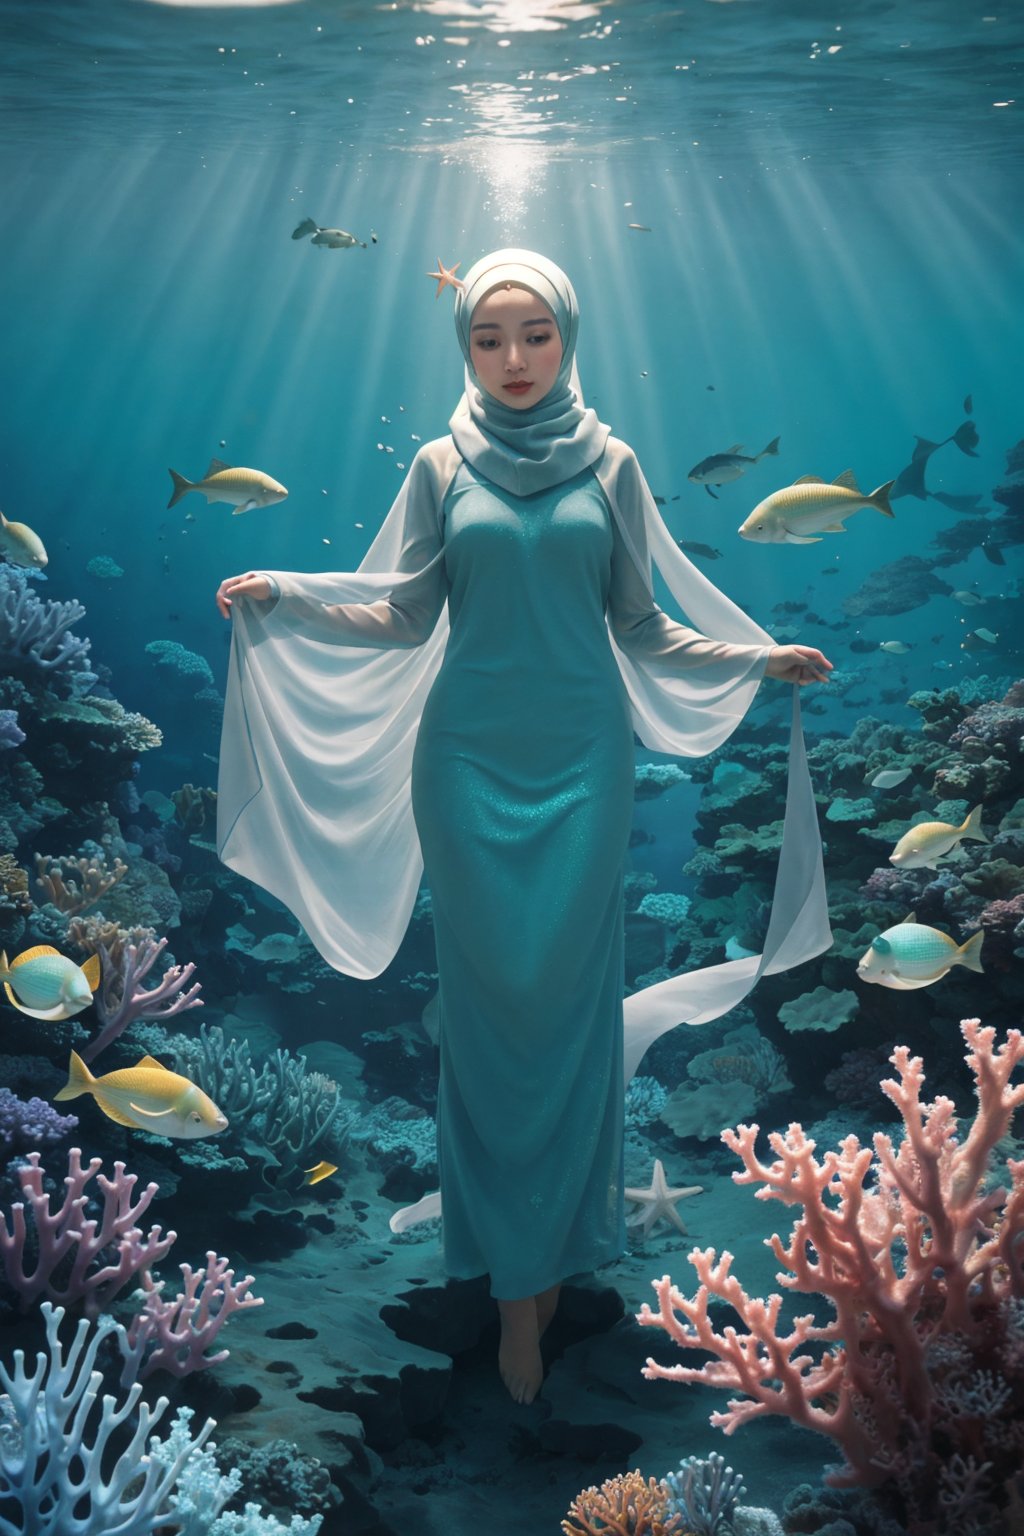 (masterpiece, best quality, realistic, ultra-realistic, realism, photorealism, 8k wallpaper, high quality, absurdres, trending on ArtStation), Plunge into the extraordinary world beneath the ocean's surface and depict the captivating scene of a girl in (hijab with underscarf:1.2) standing at the bottom of the ocean, surrounded by a bustling array of ocean life. Bring the viewer up close and personal with the girl and the underwater realm, allowing them to appreciate the intricate details of the marine environment. Show the girl as a central figure, conveying a sense of wonder and harmony as she interacts with the underwater creatures. Use a vivid color palette to showcase the brilliant hues of coral, the shimmering scales of fish, and the delicate movements of sea plants. Incorporate elements such as seashells, starfish, and other marine flora and fauna to enhance the realism and create a sense of depth. Let the artwork transport viewers into a mesmerizing underwater world, where they can imagine themselves immersed in the girl's serene and awe-inspiring oceanic encounter.